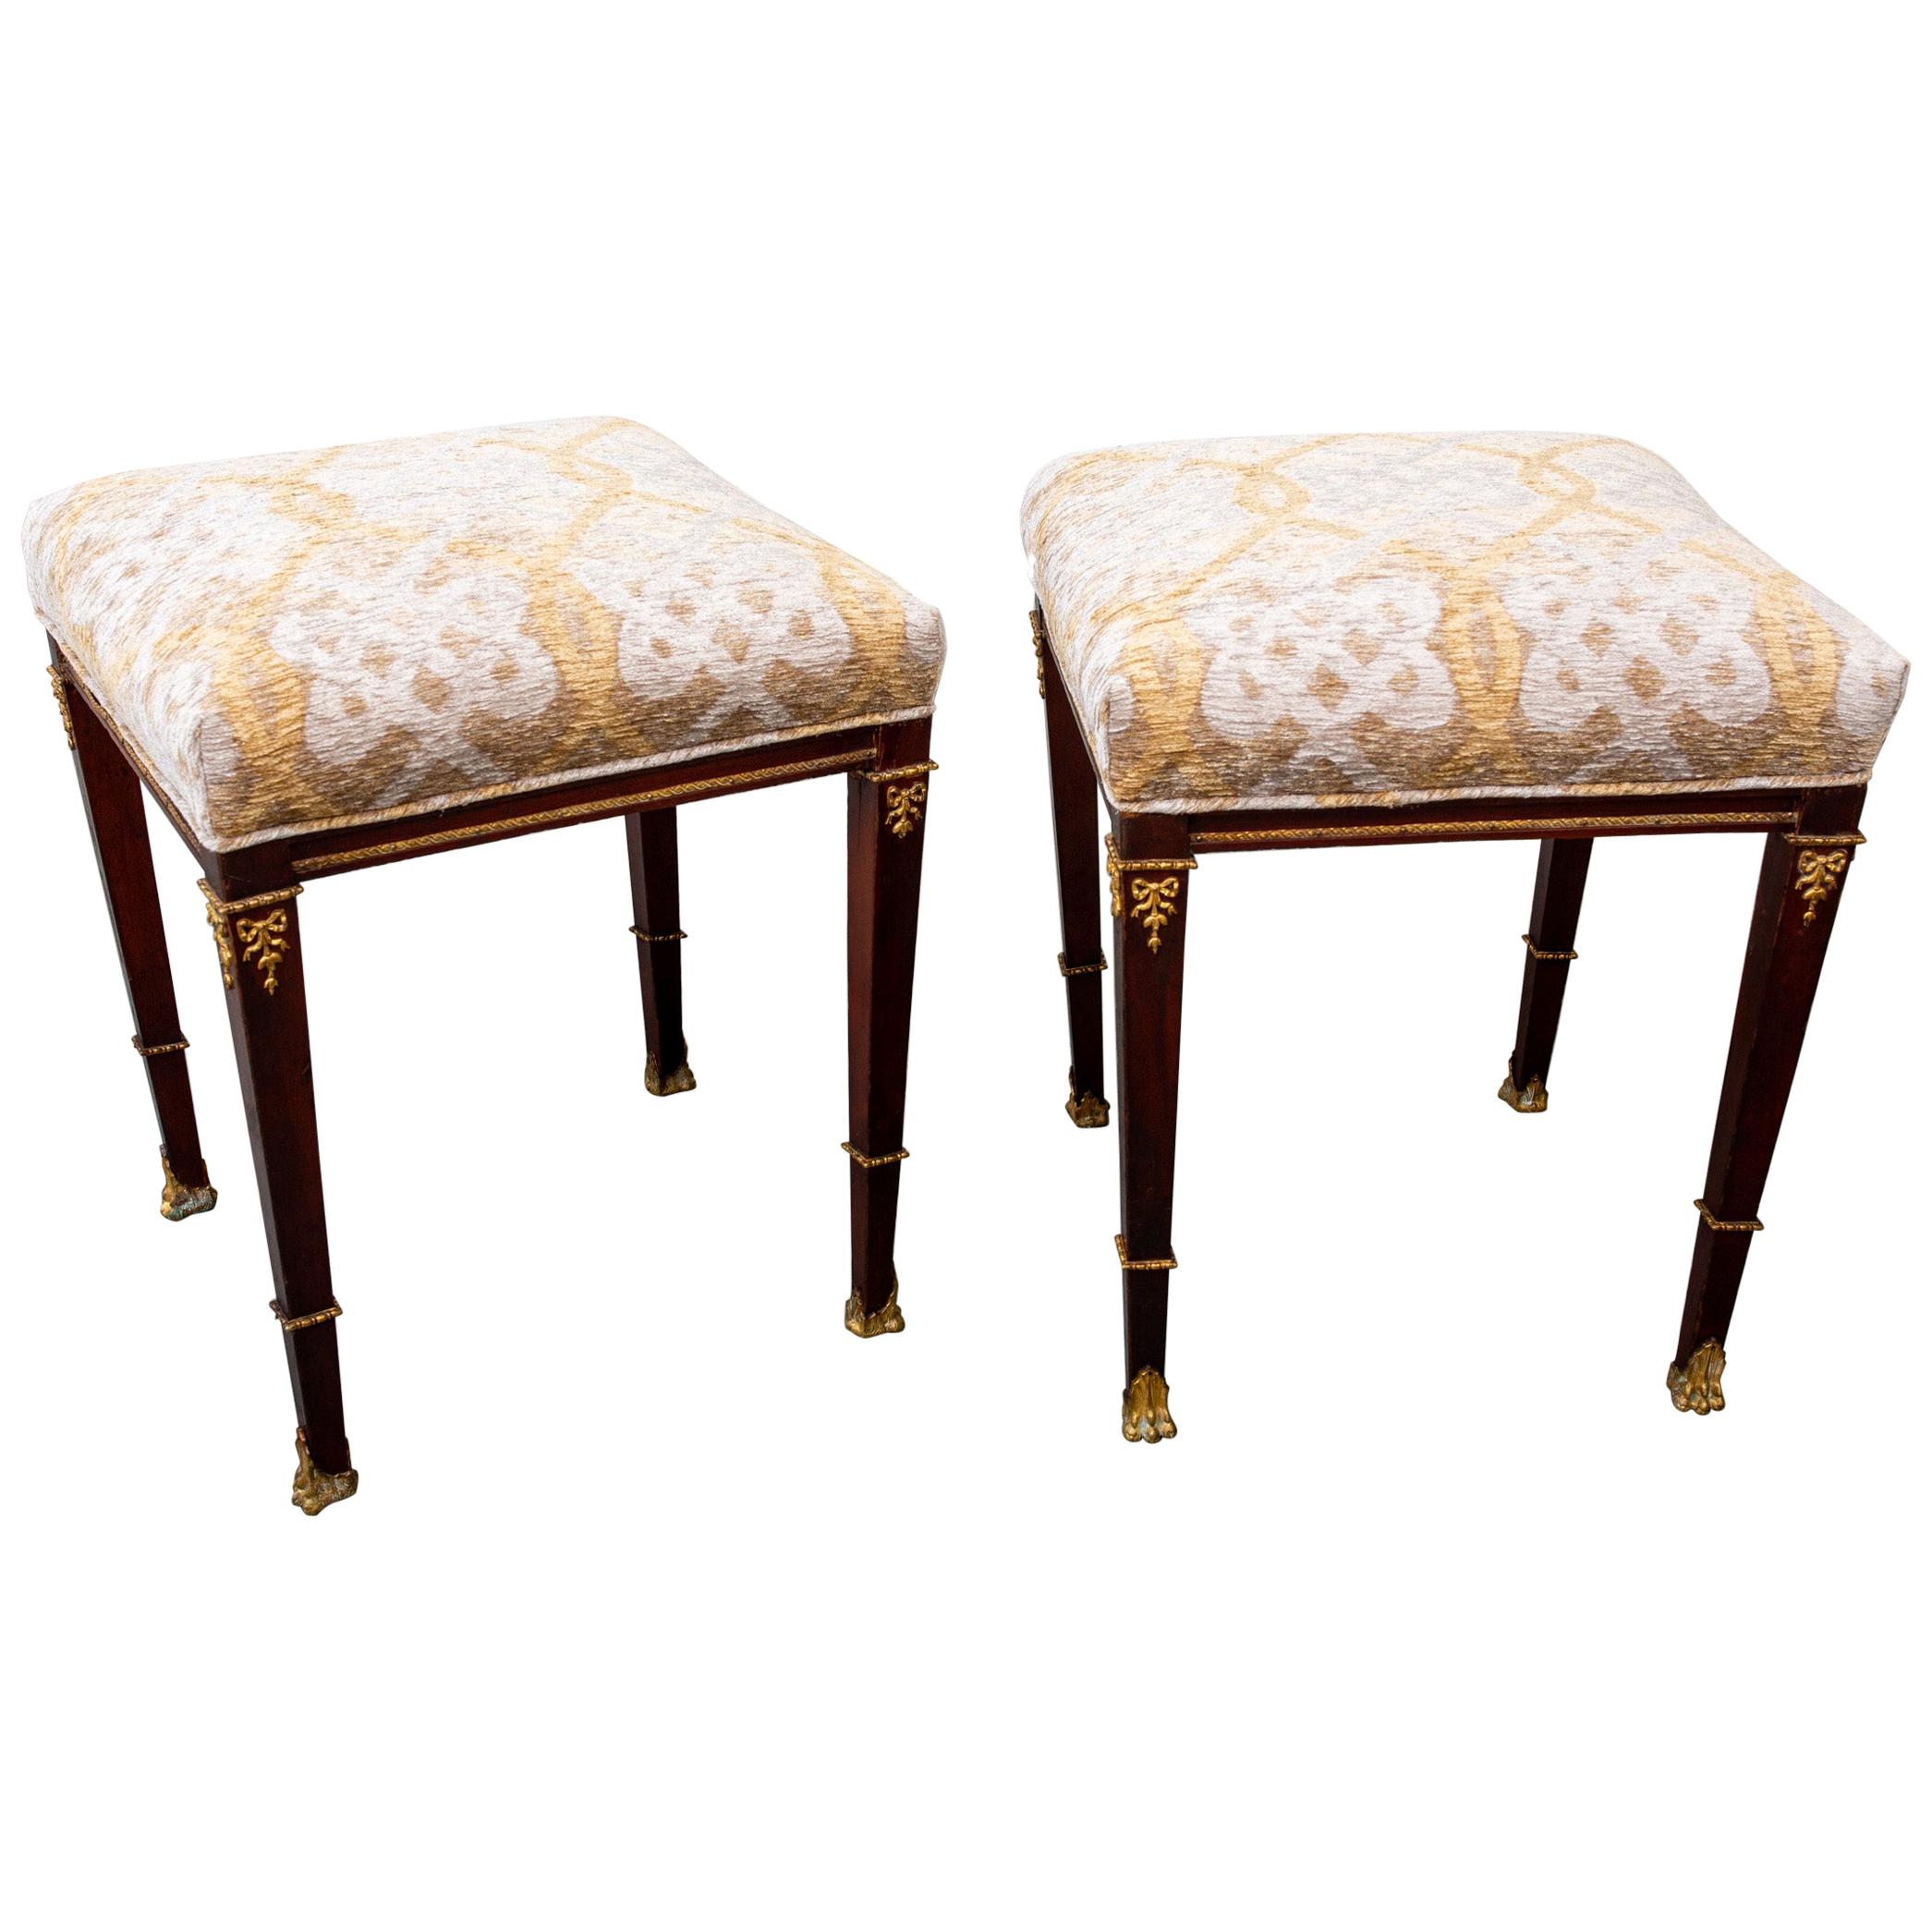 Small Pair of Late 19th Century Neoclassical Style Footstools